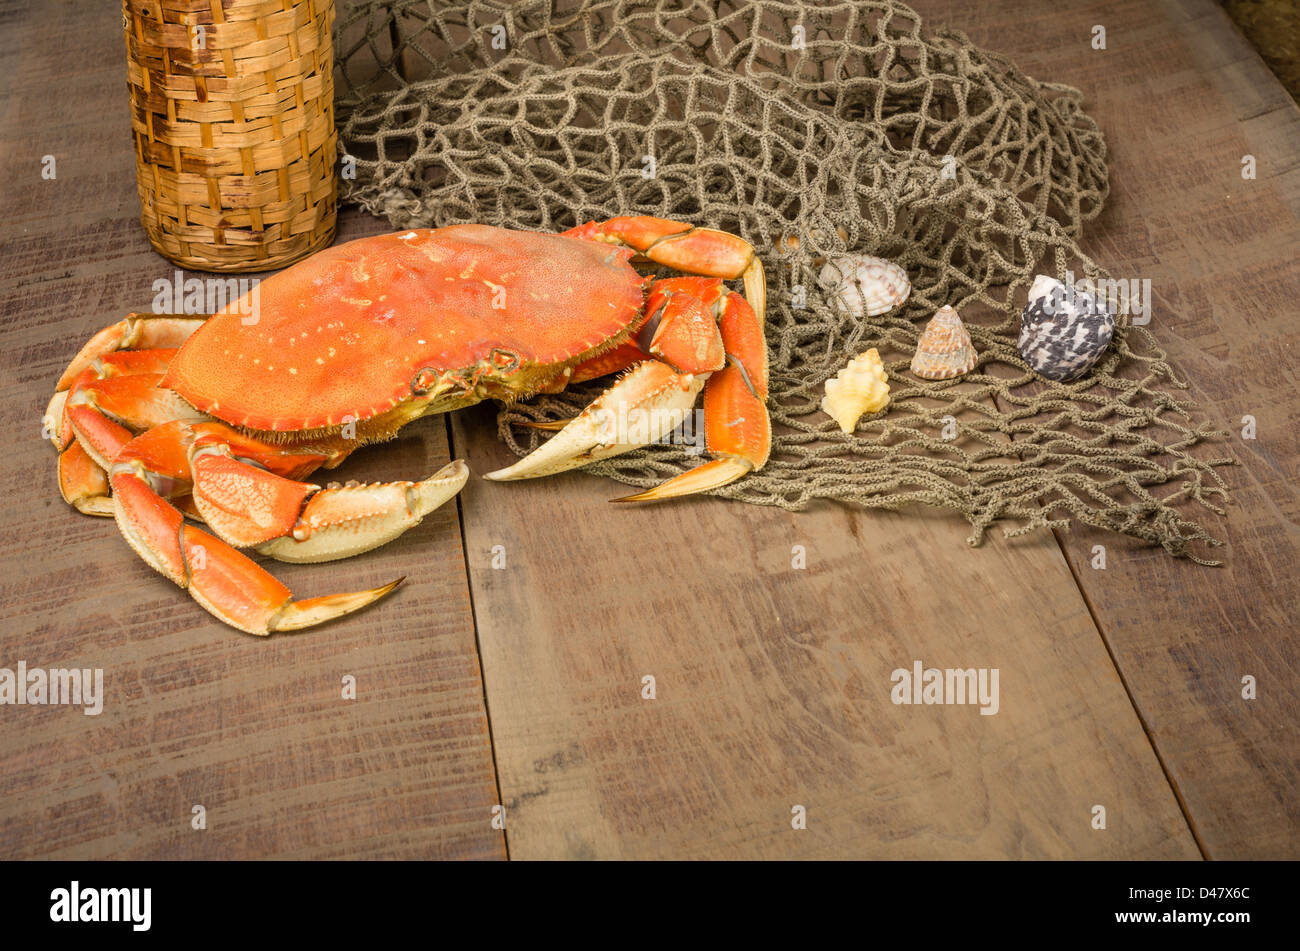 A Dungeness crab ready to be cooked with wine bottle and net Stock Photo